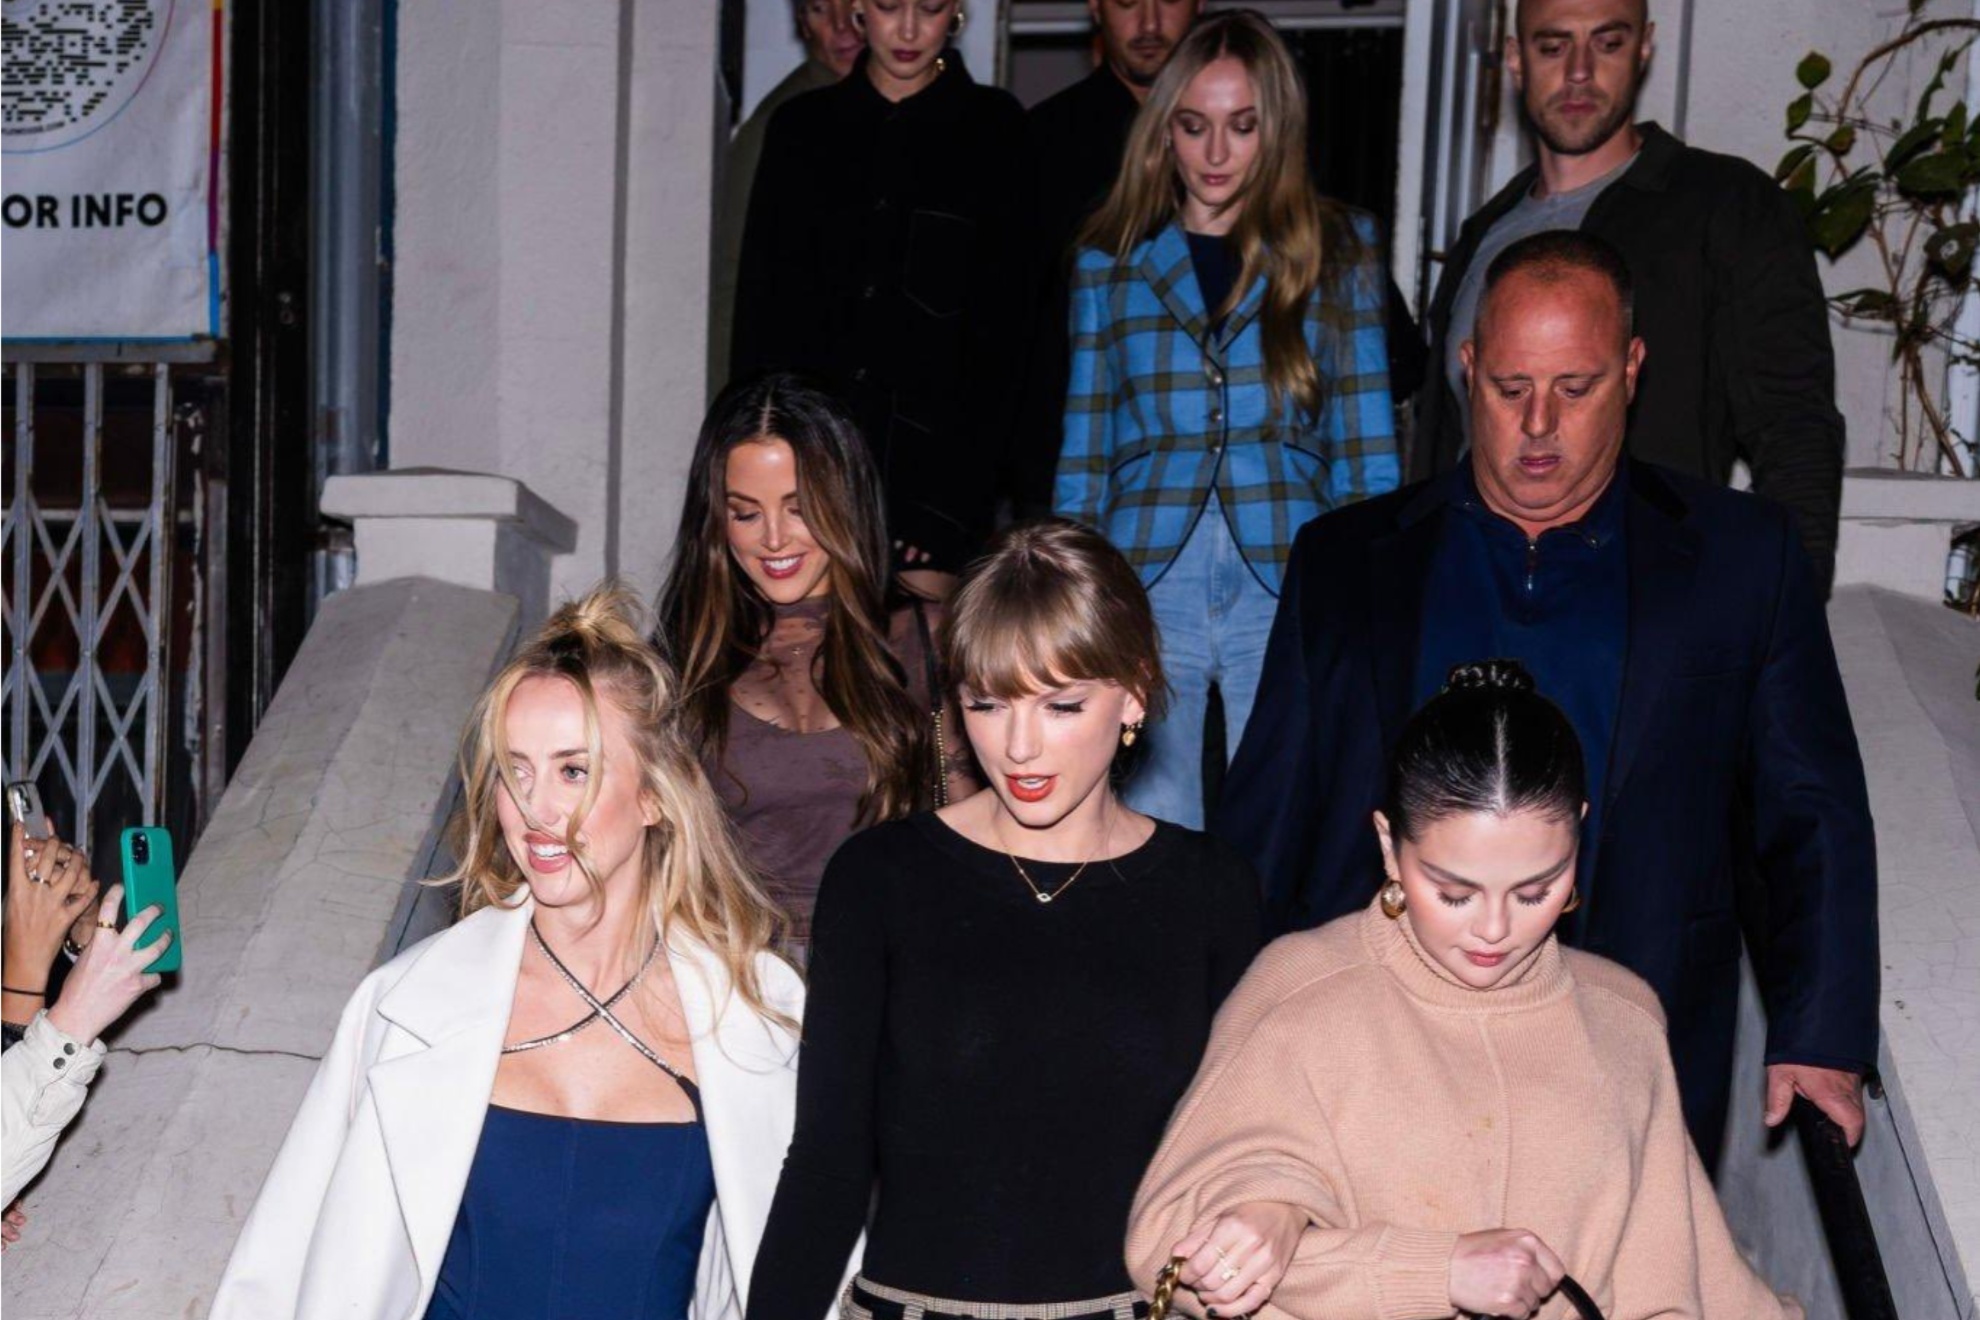 Swift, Gomez, Turner, Hadid, Delevingne, and Mahomes painted NYC red.